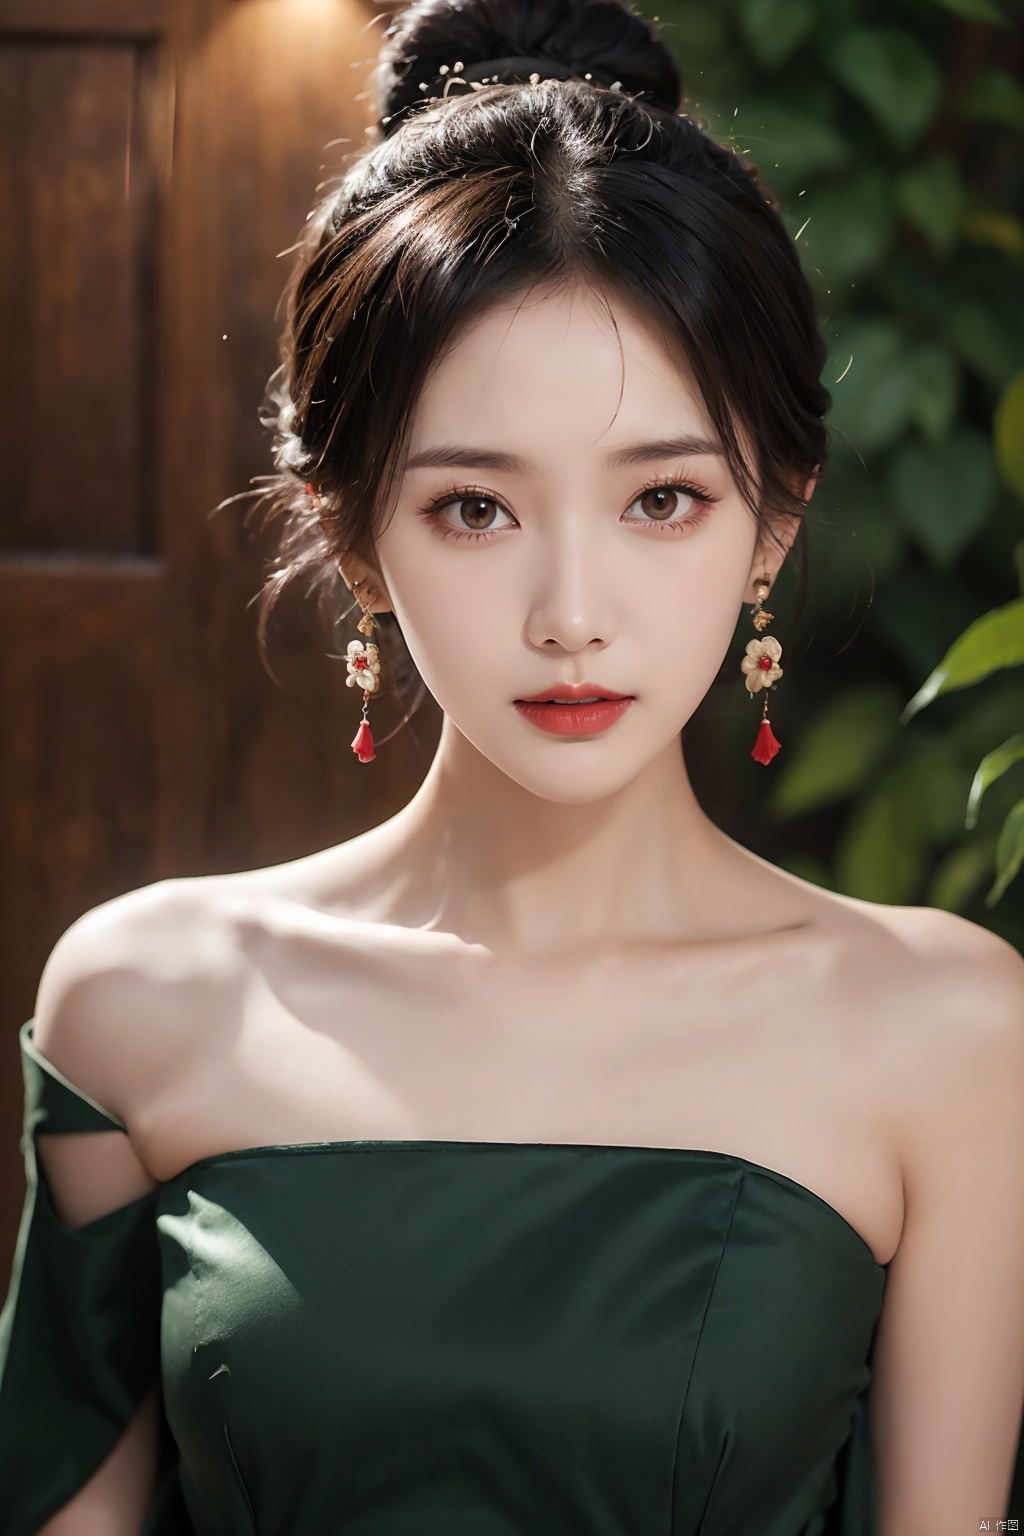  1girl, bare shoulders, black hair, breasts,Wooden wall, bush,Dai ethnic skirt, earrings, flower, garden,Chinese Dai ethnic clothing,Diagonal draped light gauze skirt, strapless dress, grass, hair bun, jewelry, makeup, outdoors, plant, red lips, solo, standing, depth of field